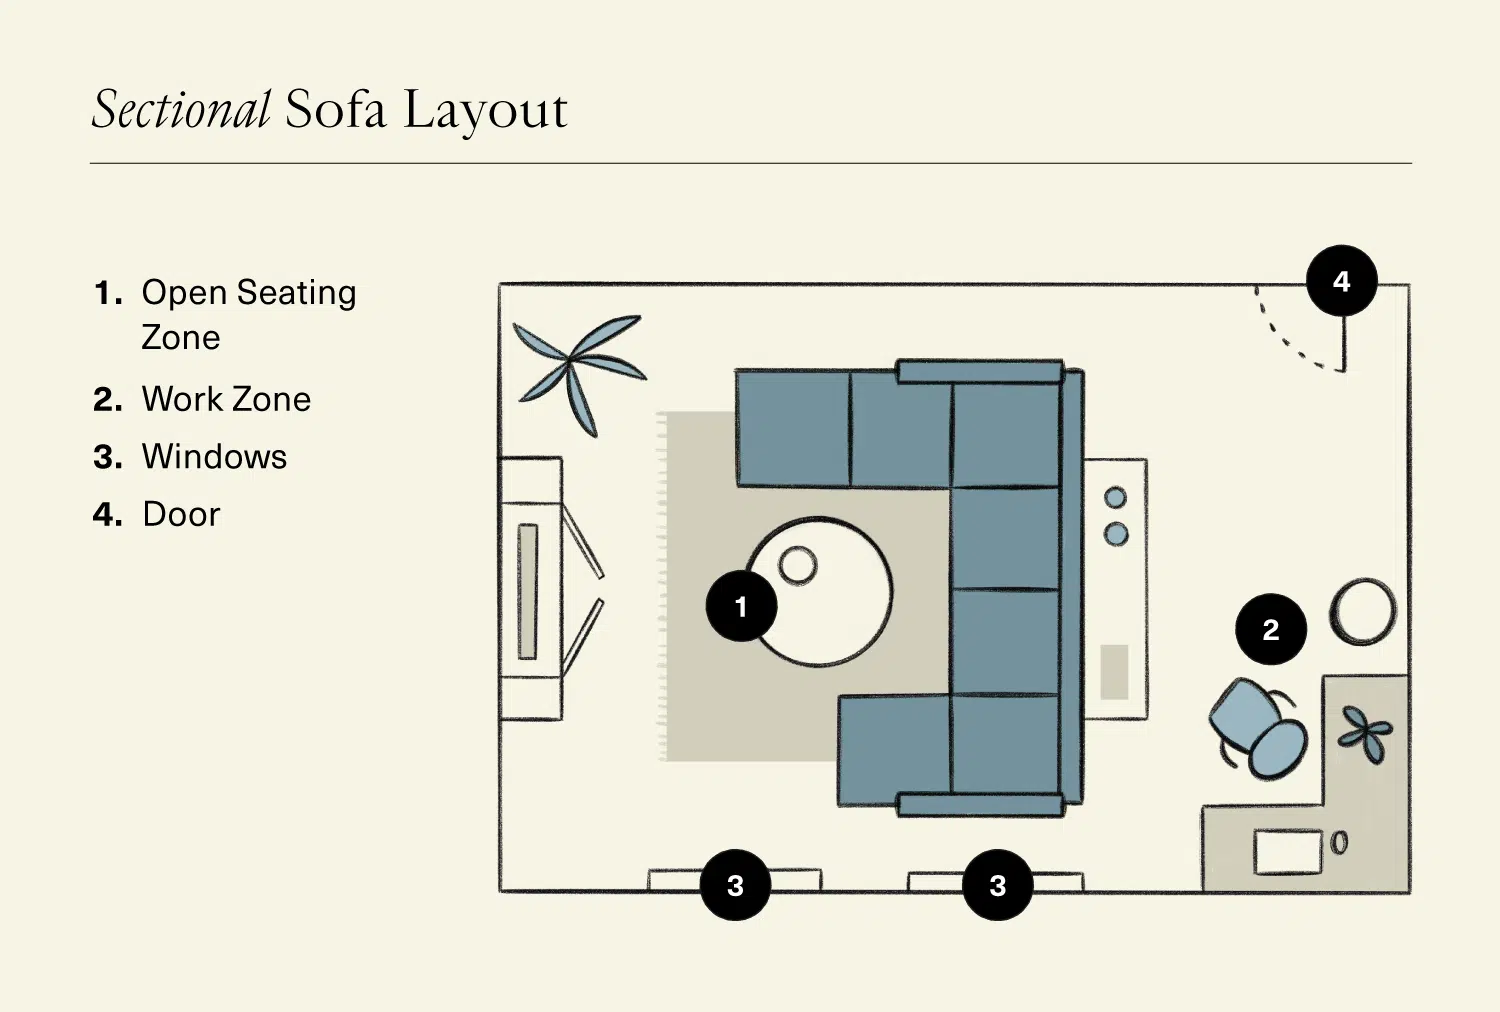 How to Arrange Furniture: Illustration of Living Room with Sectional Sofa Layout